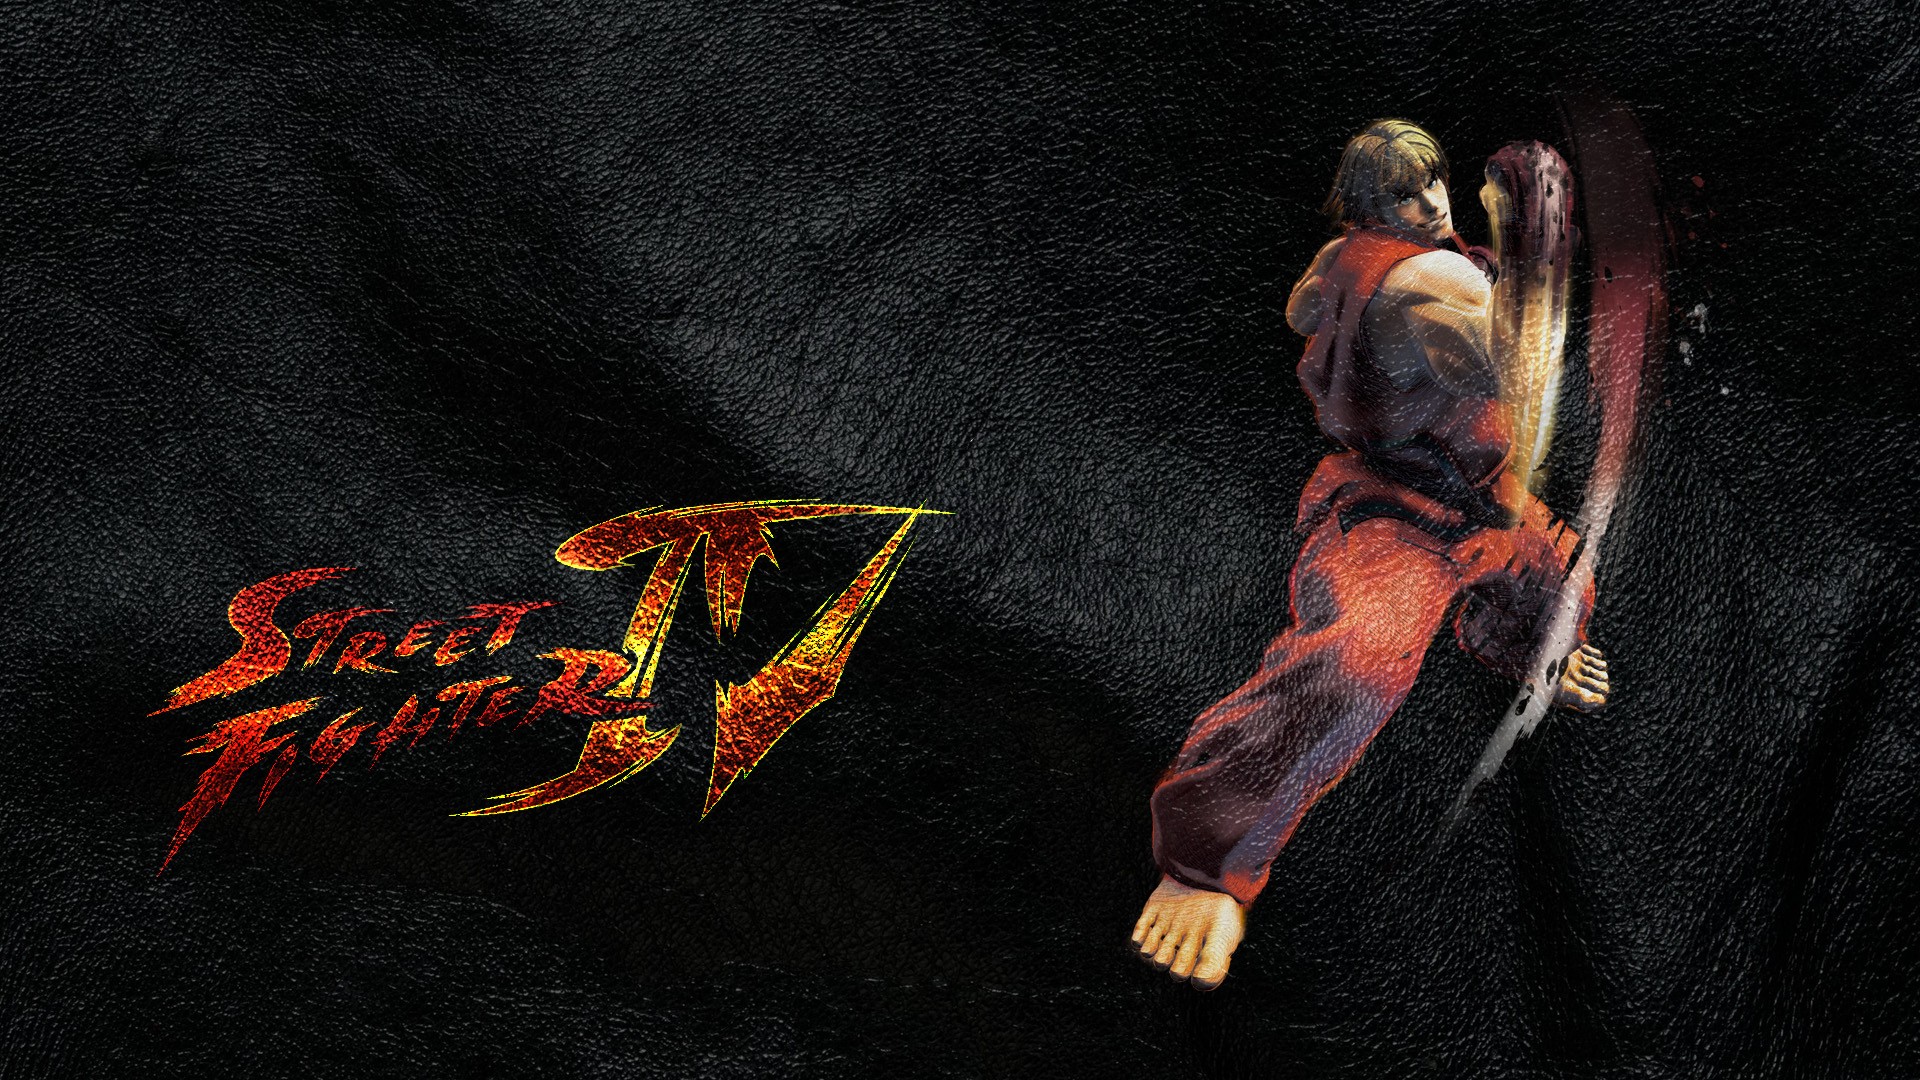 Ken Street Fighter Iv Best Widescreen Background Awesome